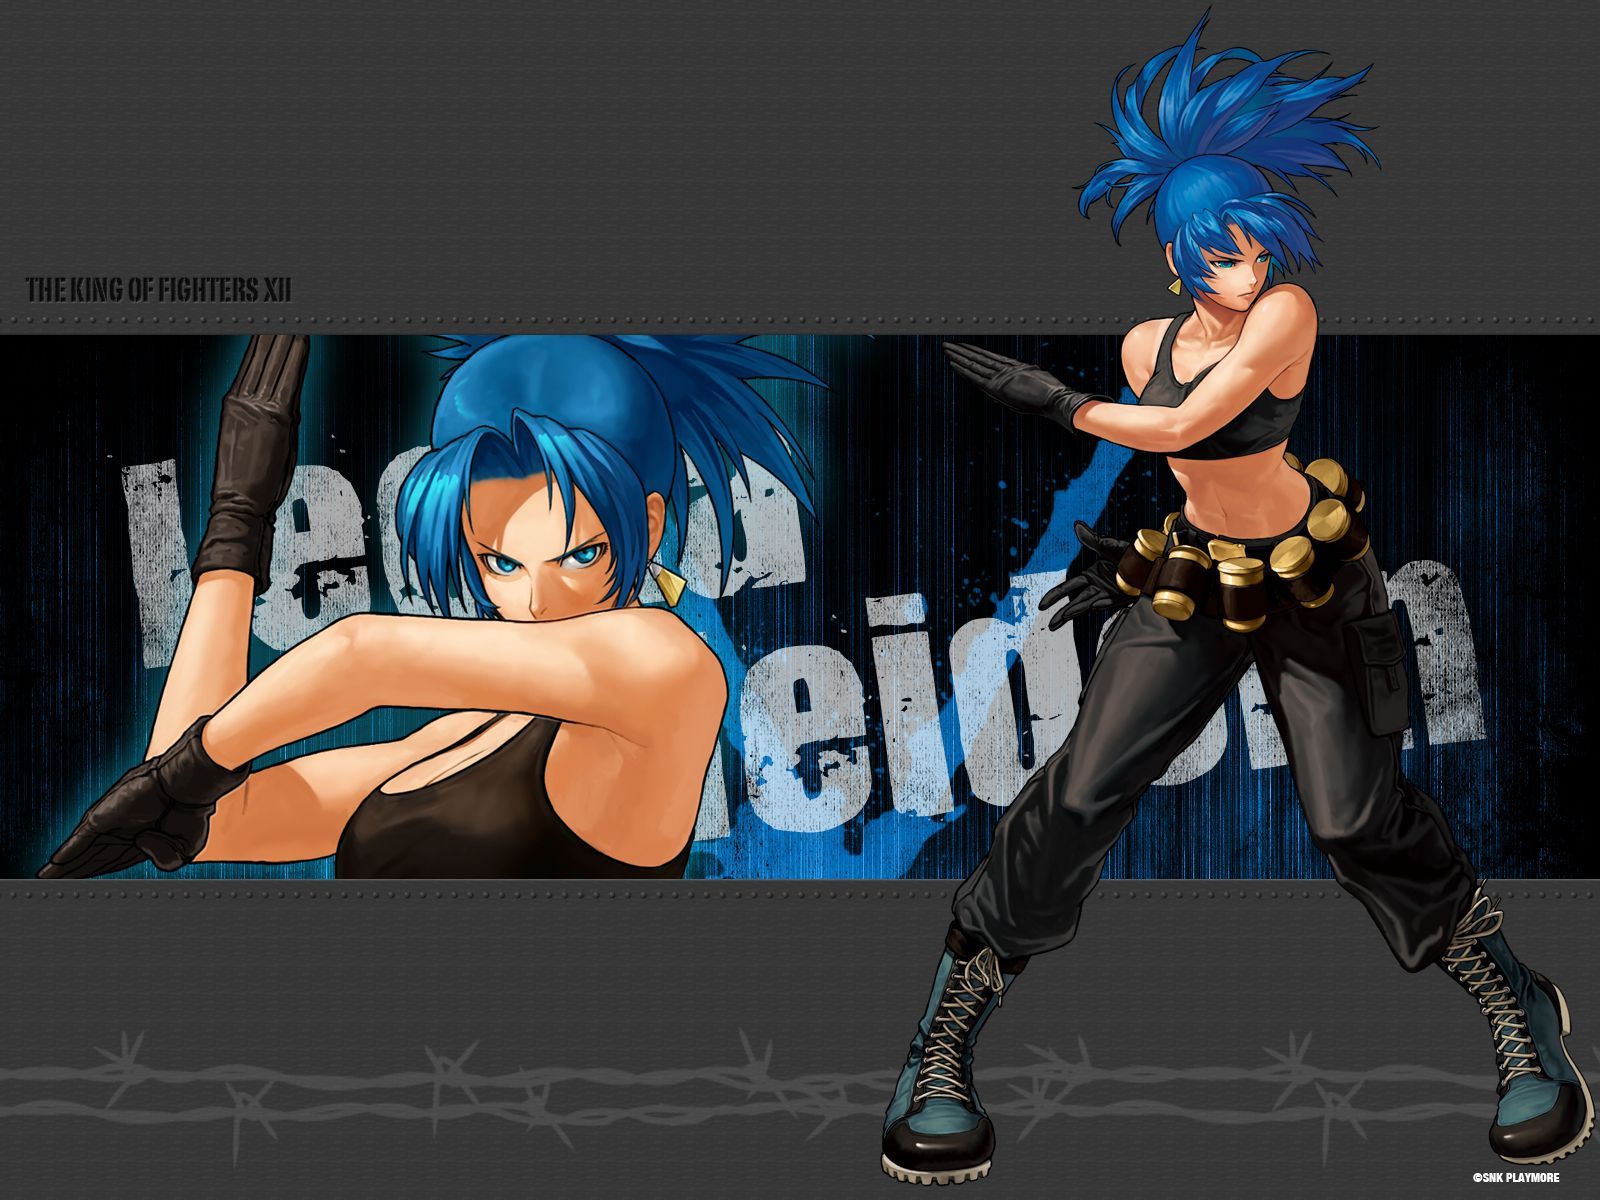 king of fighters characters female